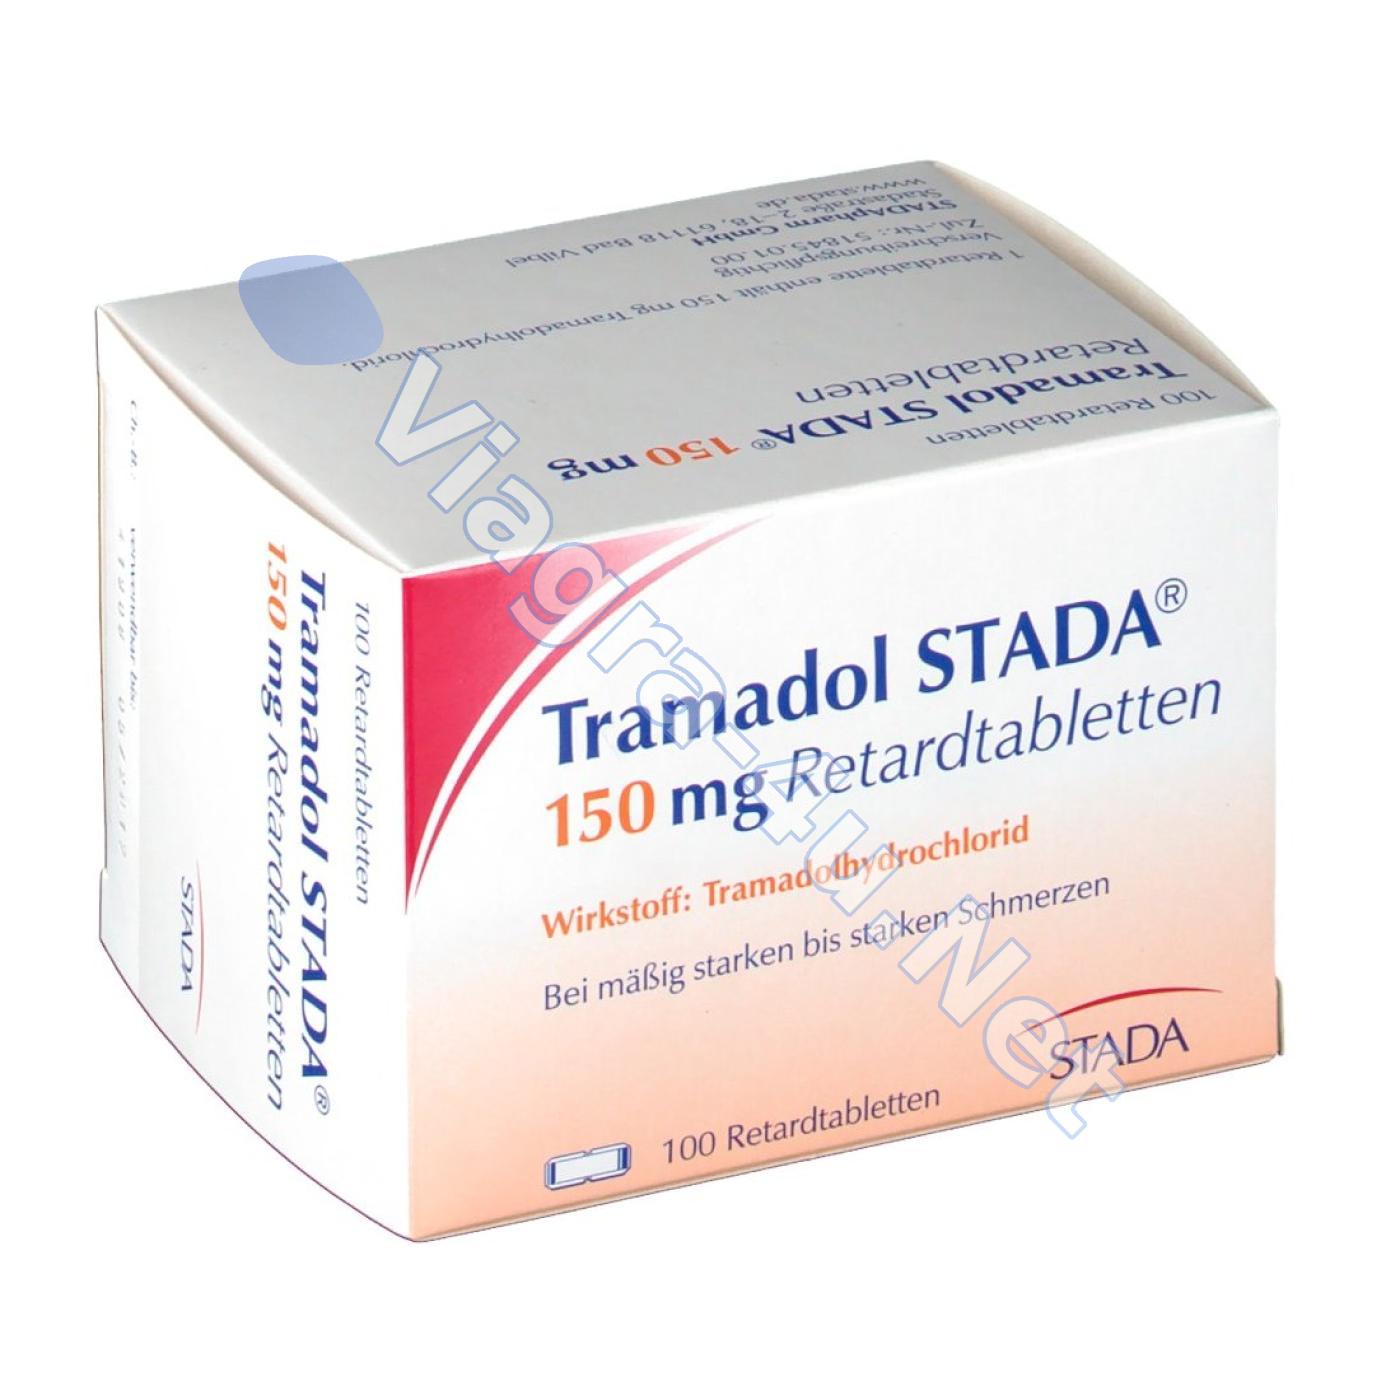 buy tramadol online without script code background